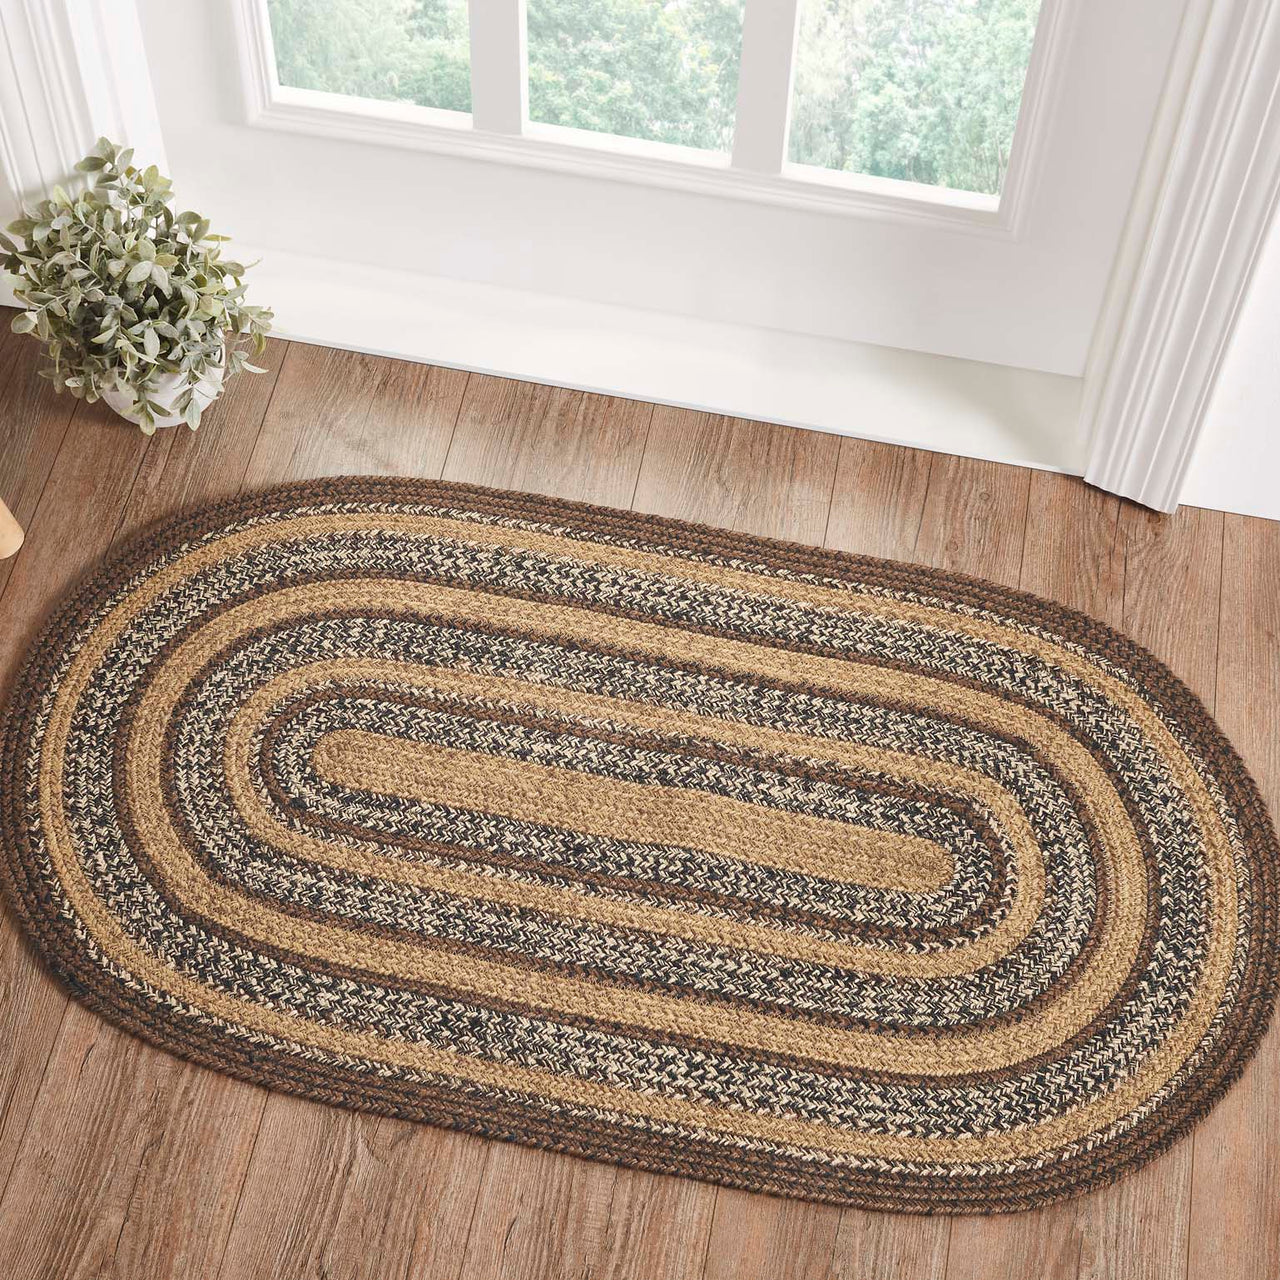 Espresso Jute Braided Rug Oval with Rug Pad 27"x48" VHC Brands